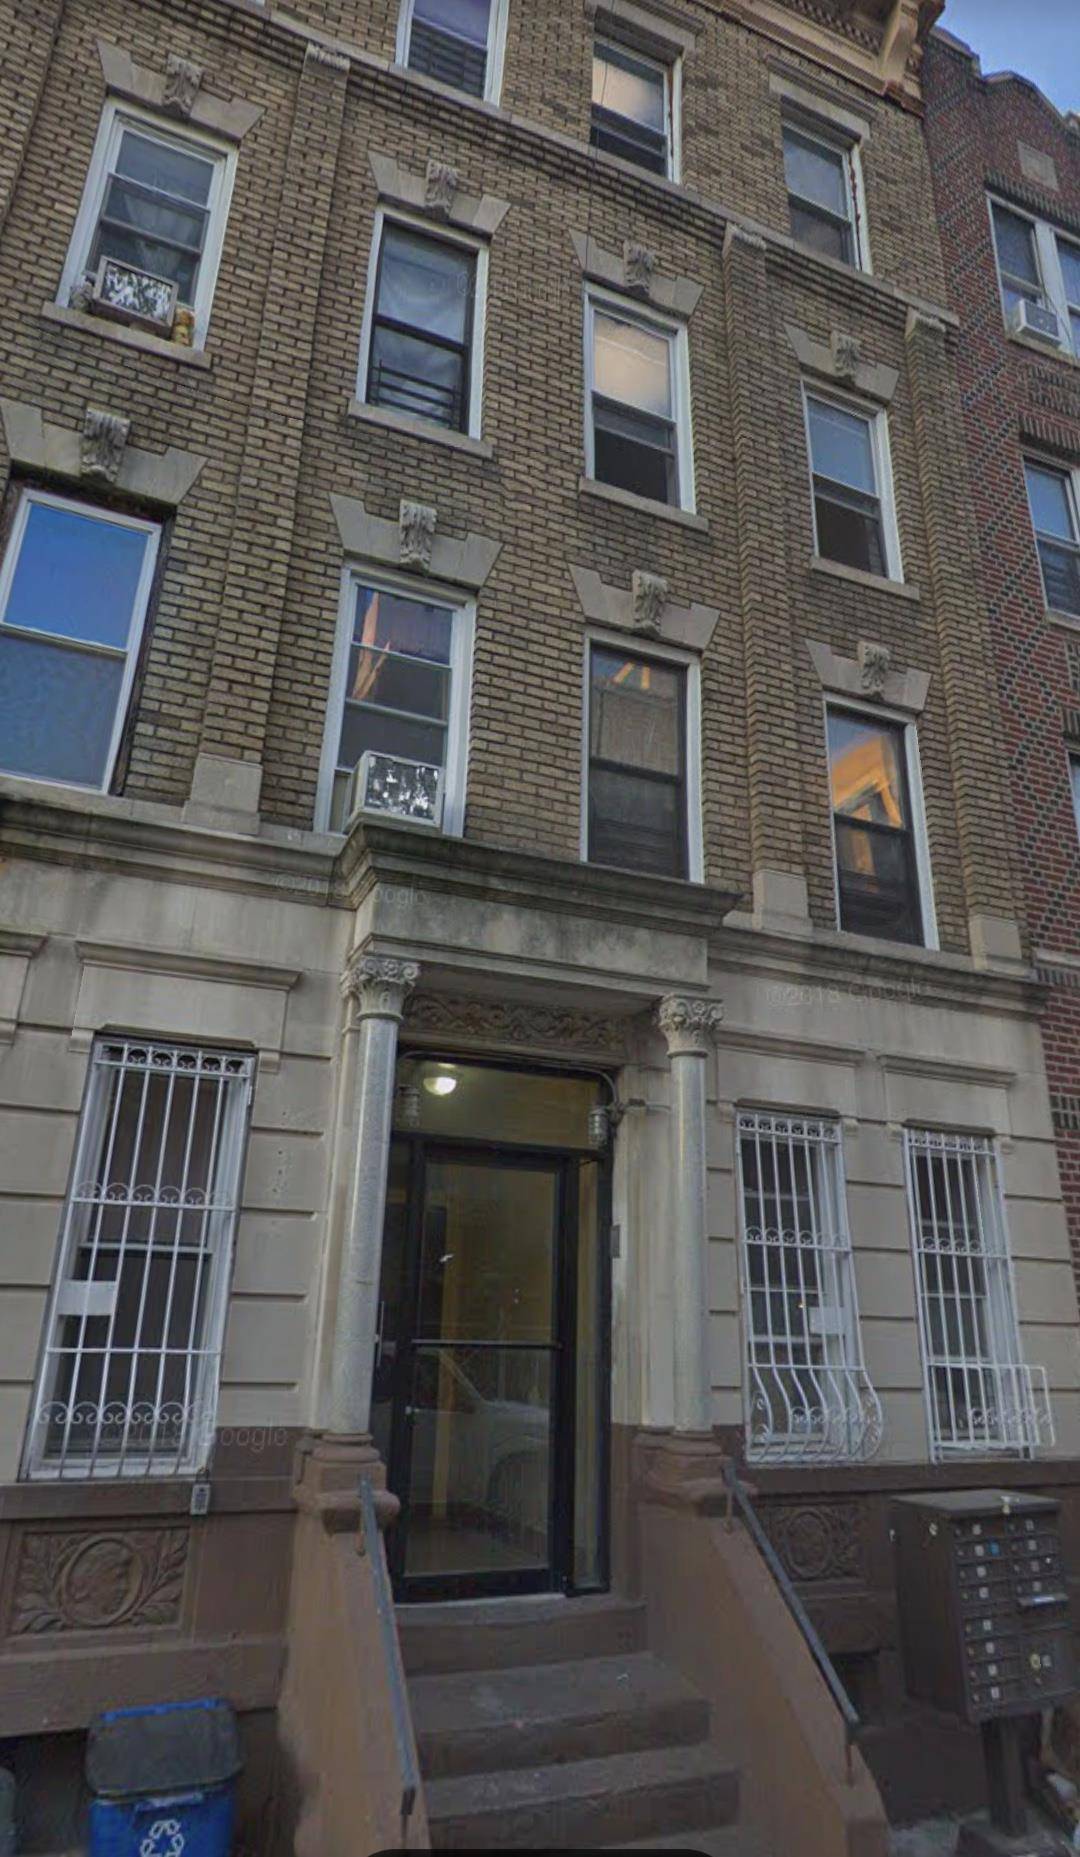 An 8 unit multi family building located in the Crown heights neighborhood of Brooklyn.